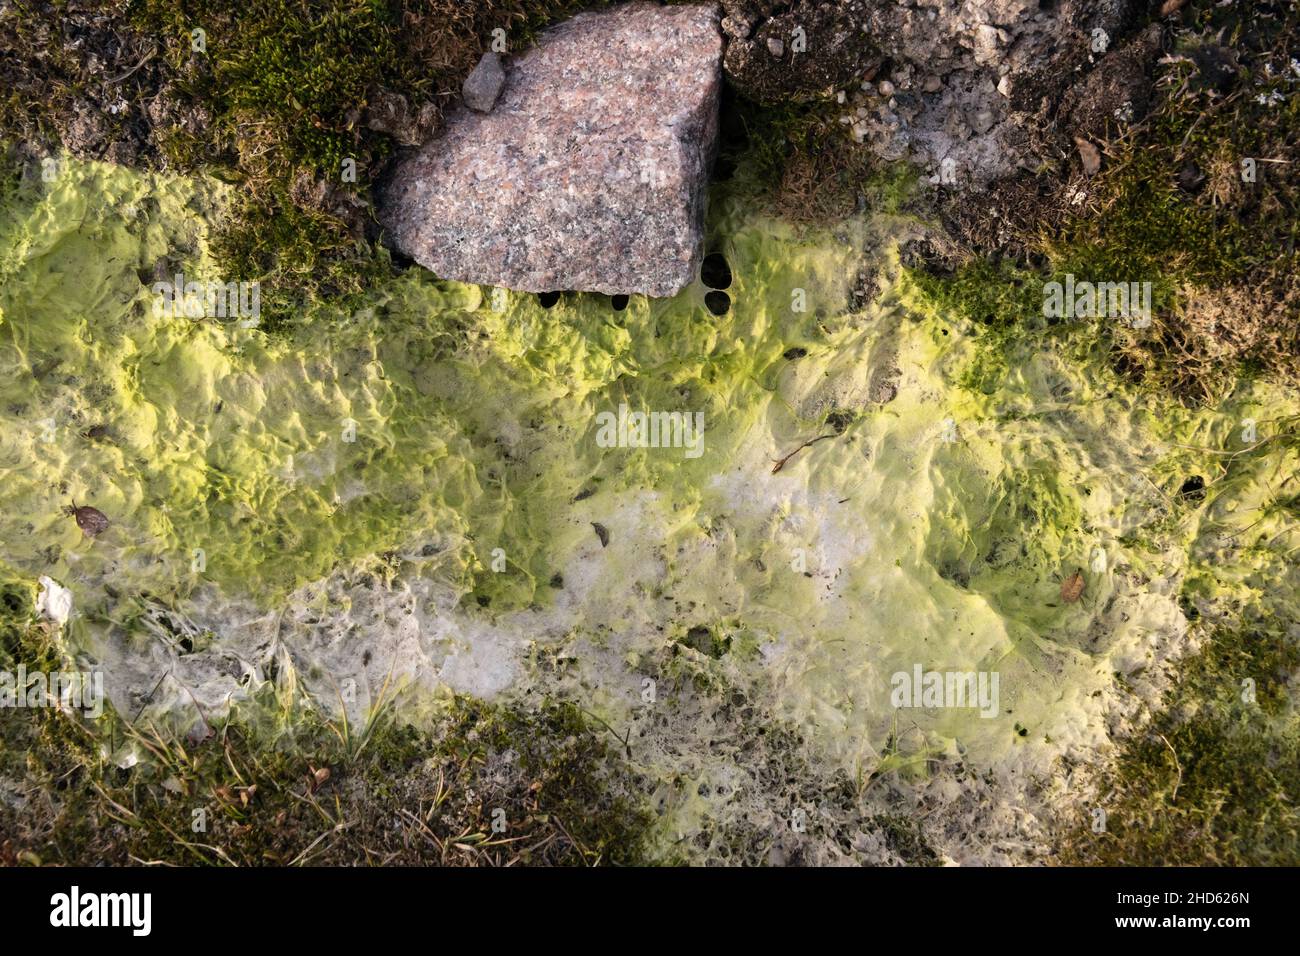 Lime green pond scum, possibly cyanbacteria, Danmark O, Scoresby Sund, East Greenland Stock Photo